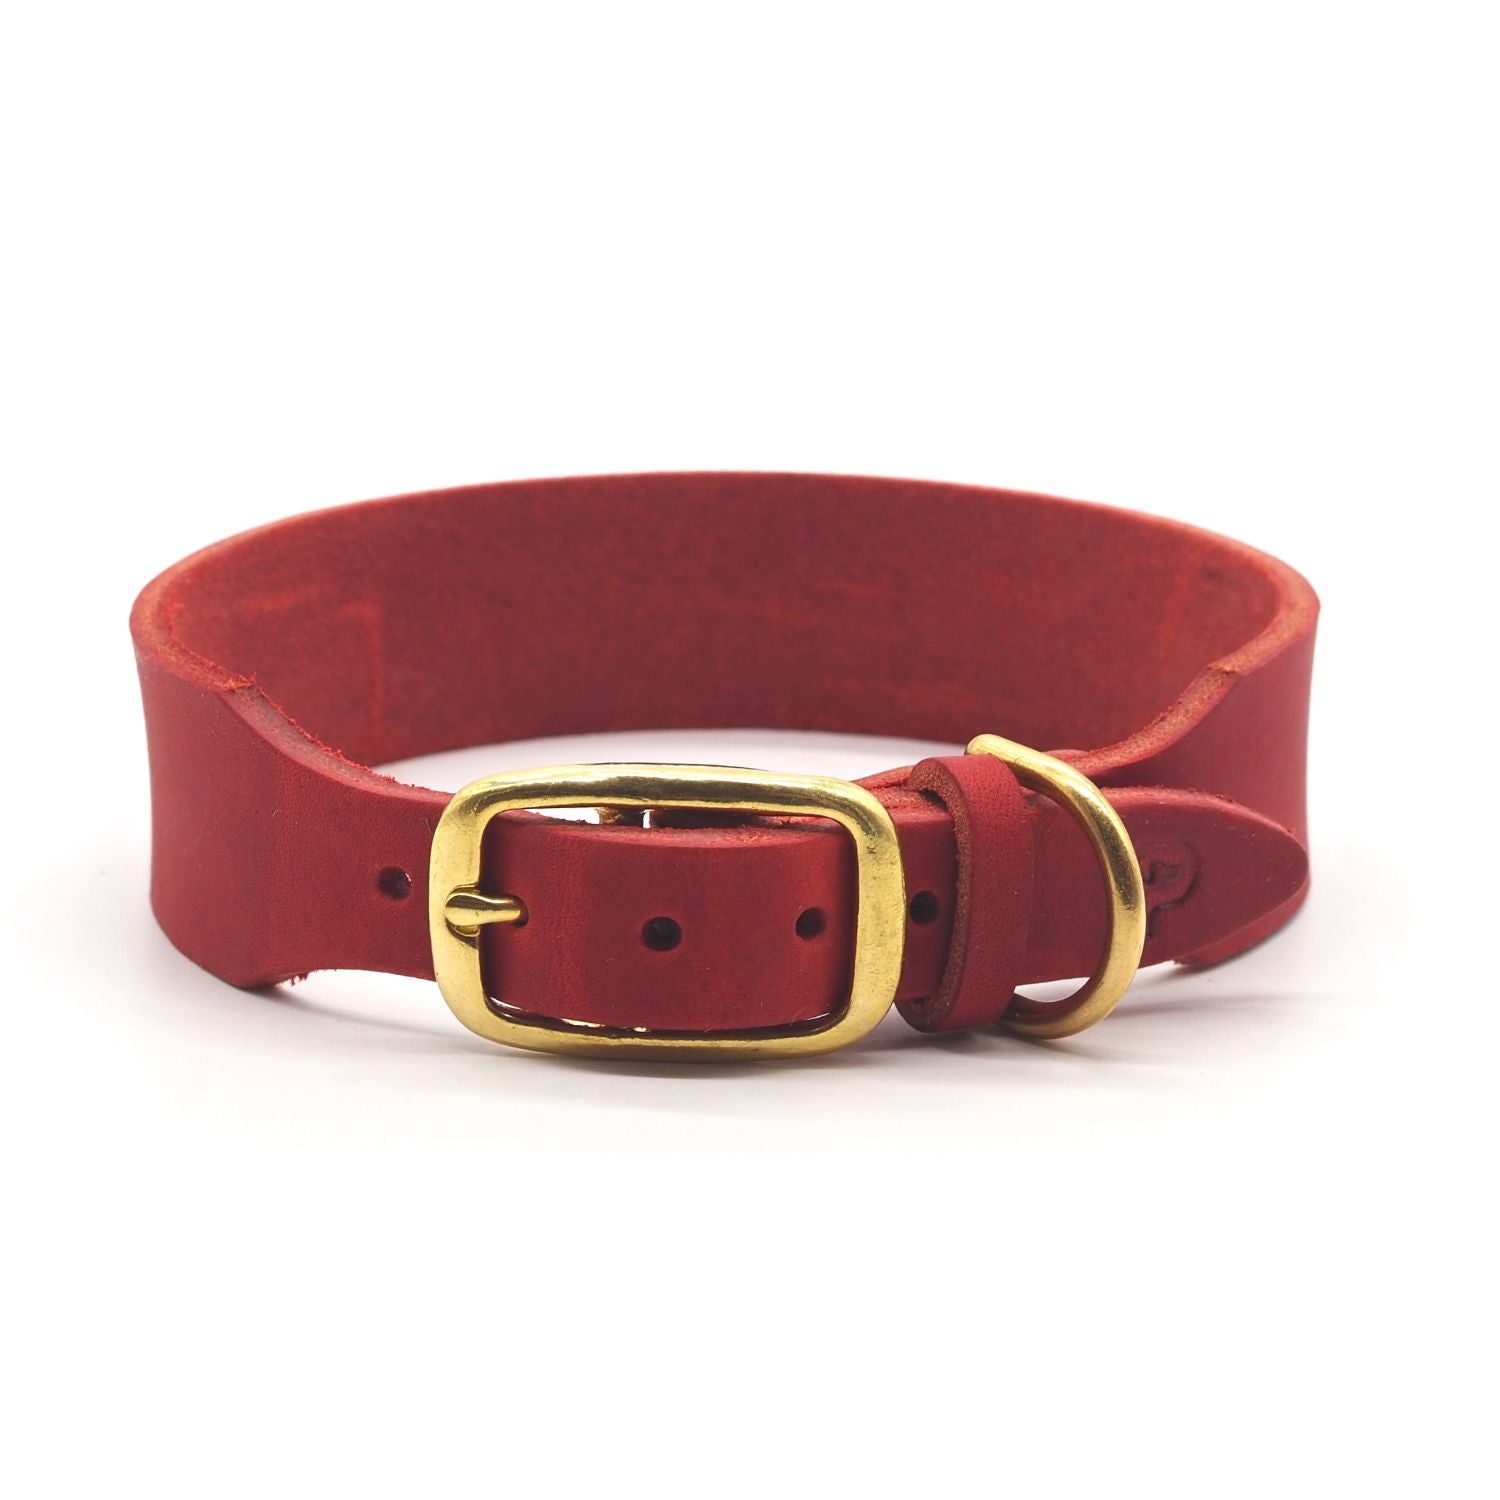 Personalizable collar with name | chili